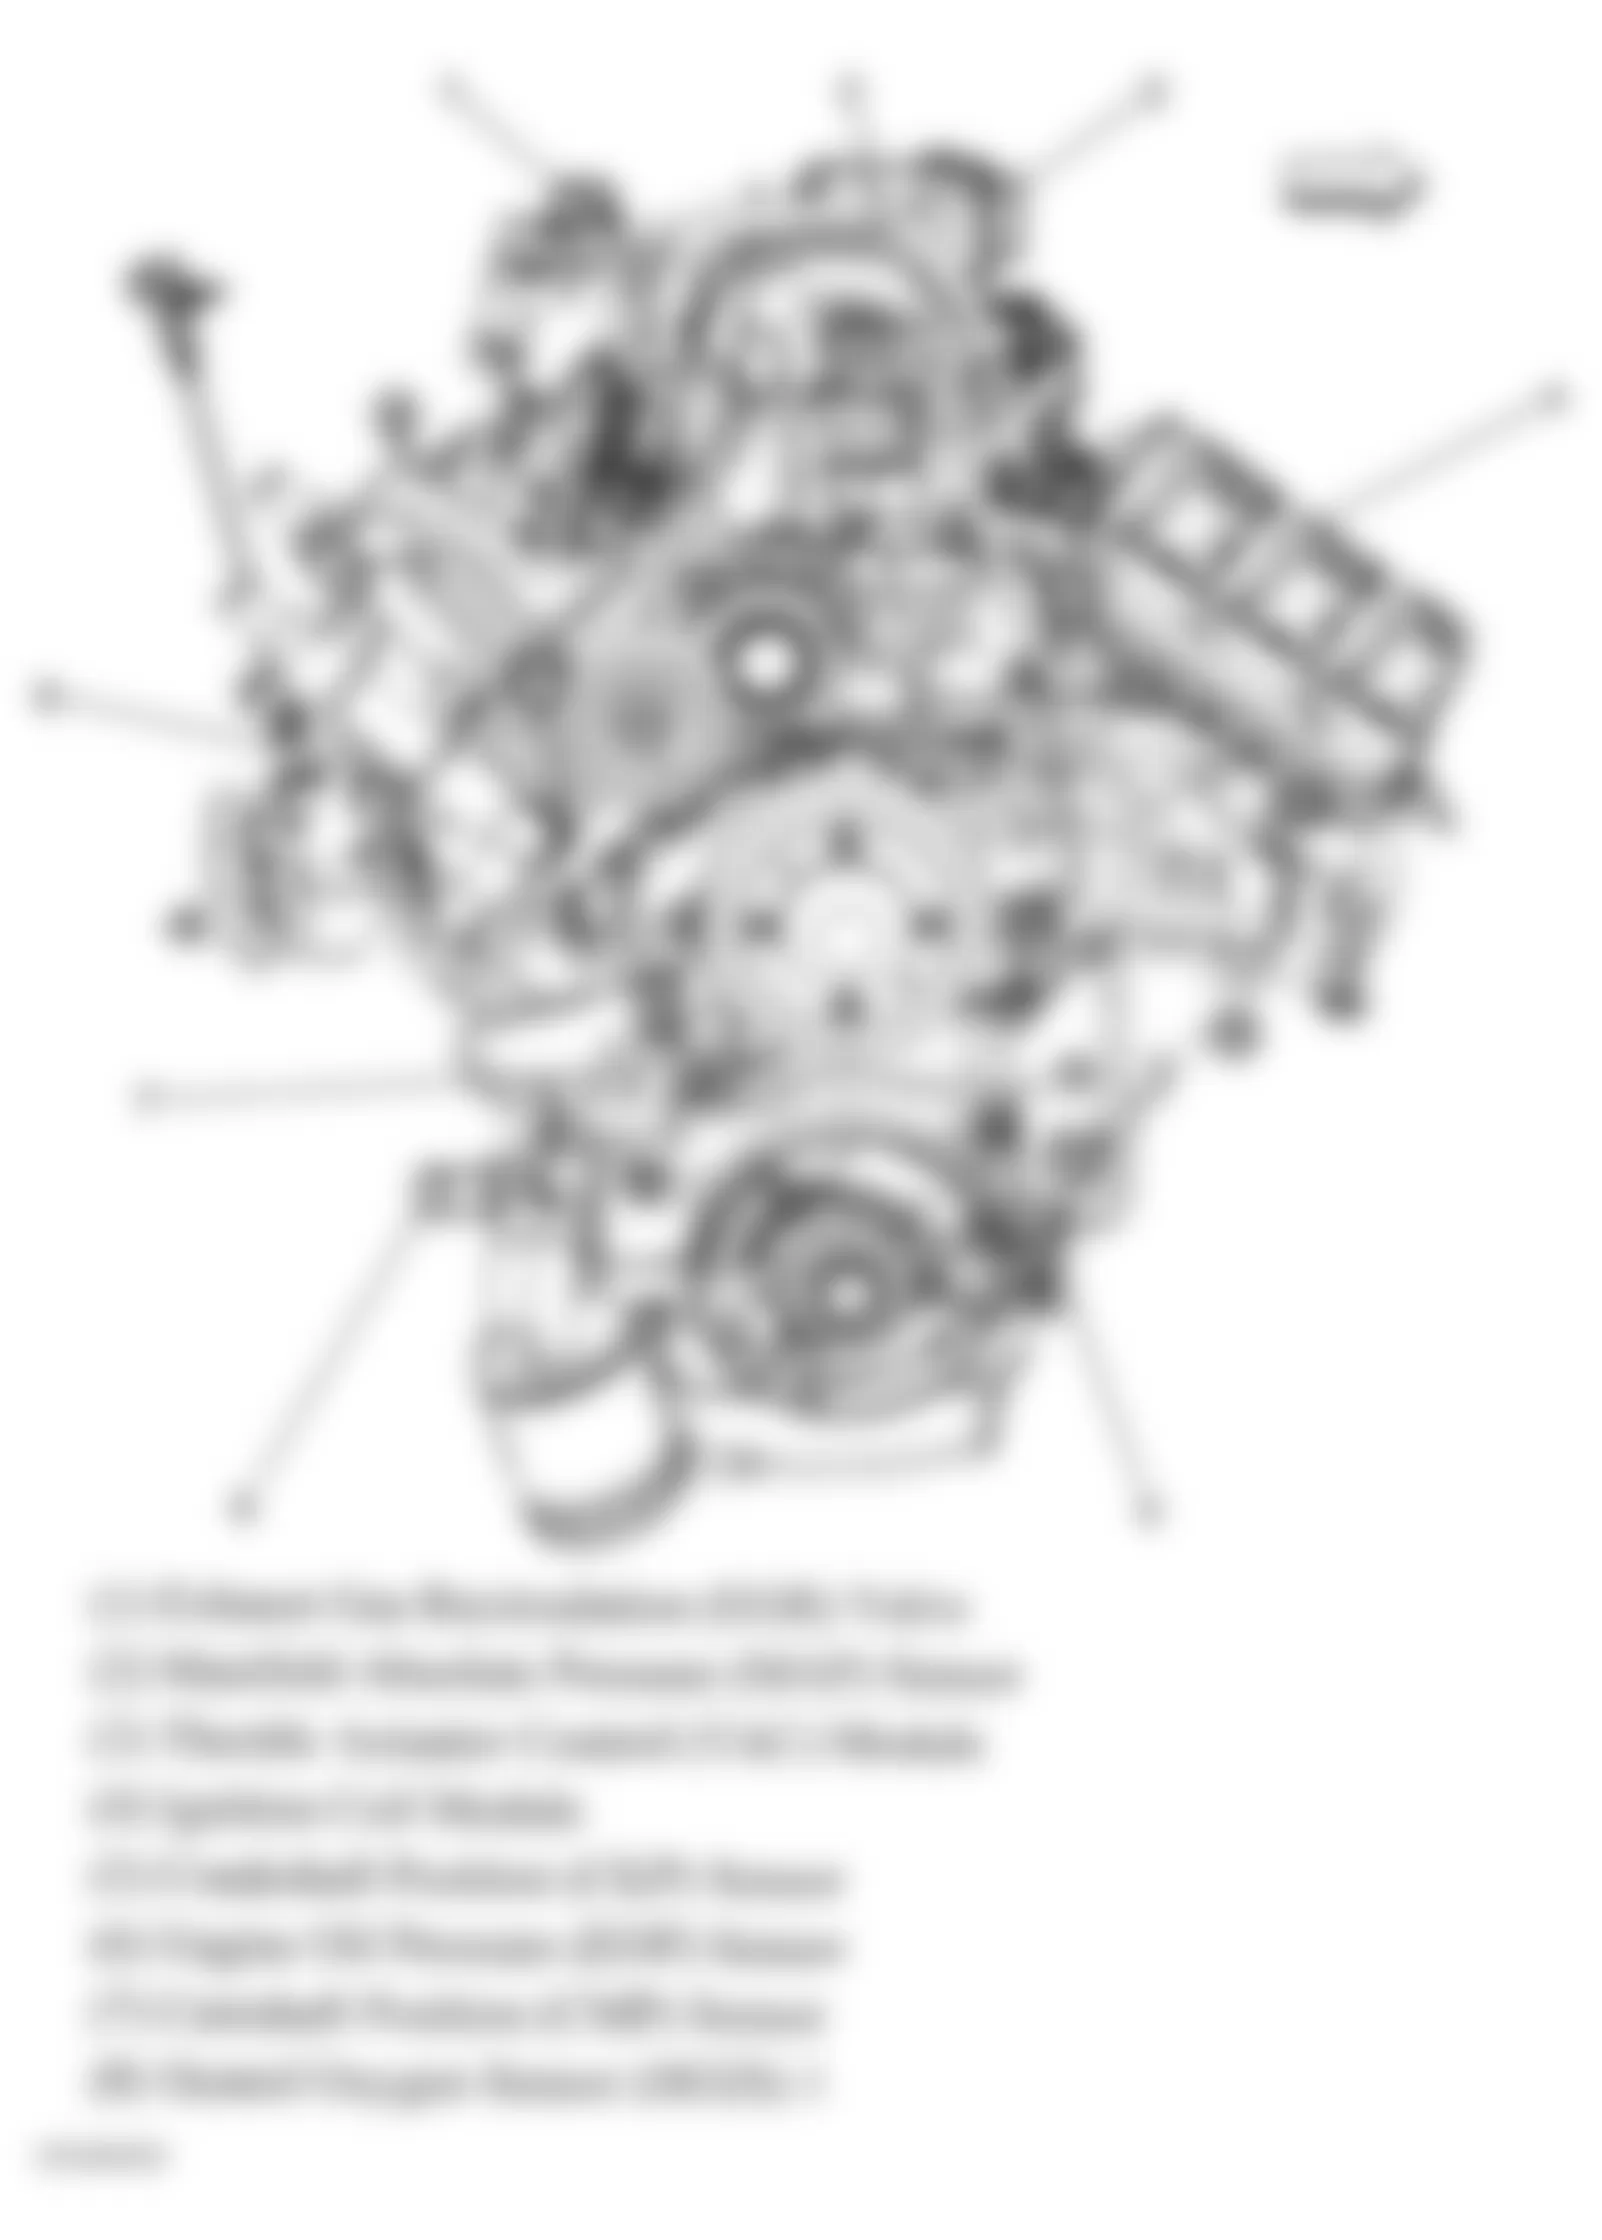 Buick LaCrosse CX 2006 - Component Locations -  Front Of Engine (3.8L)